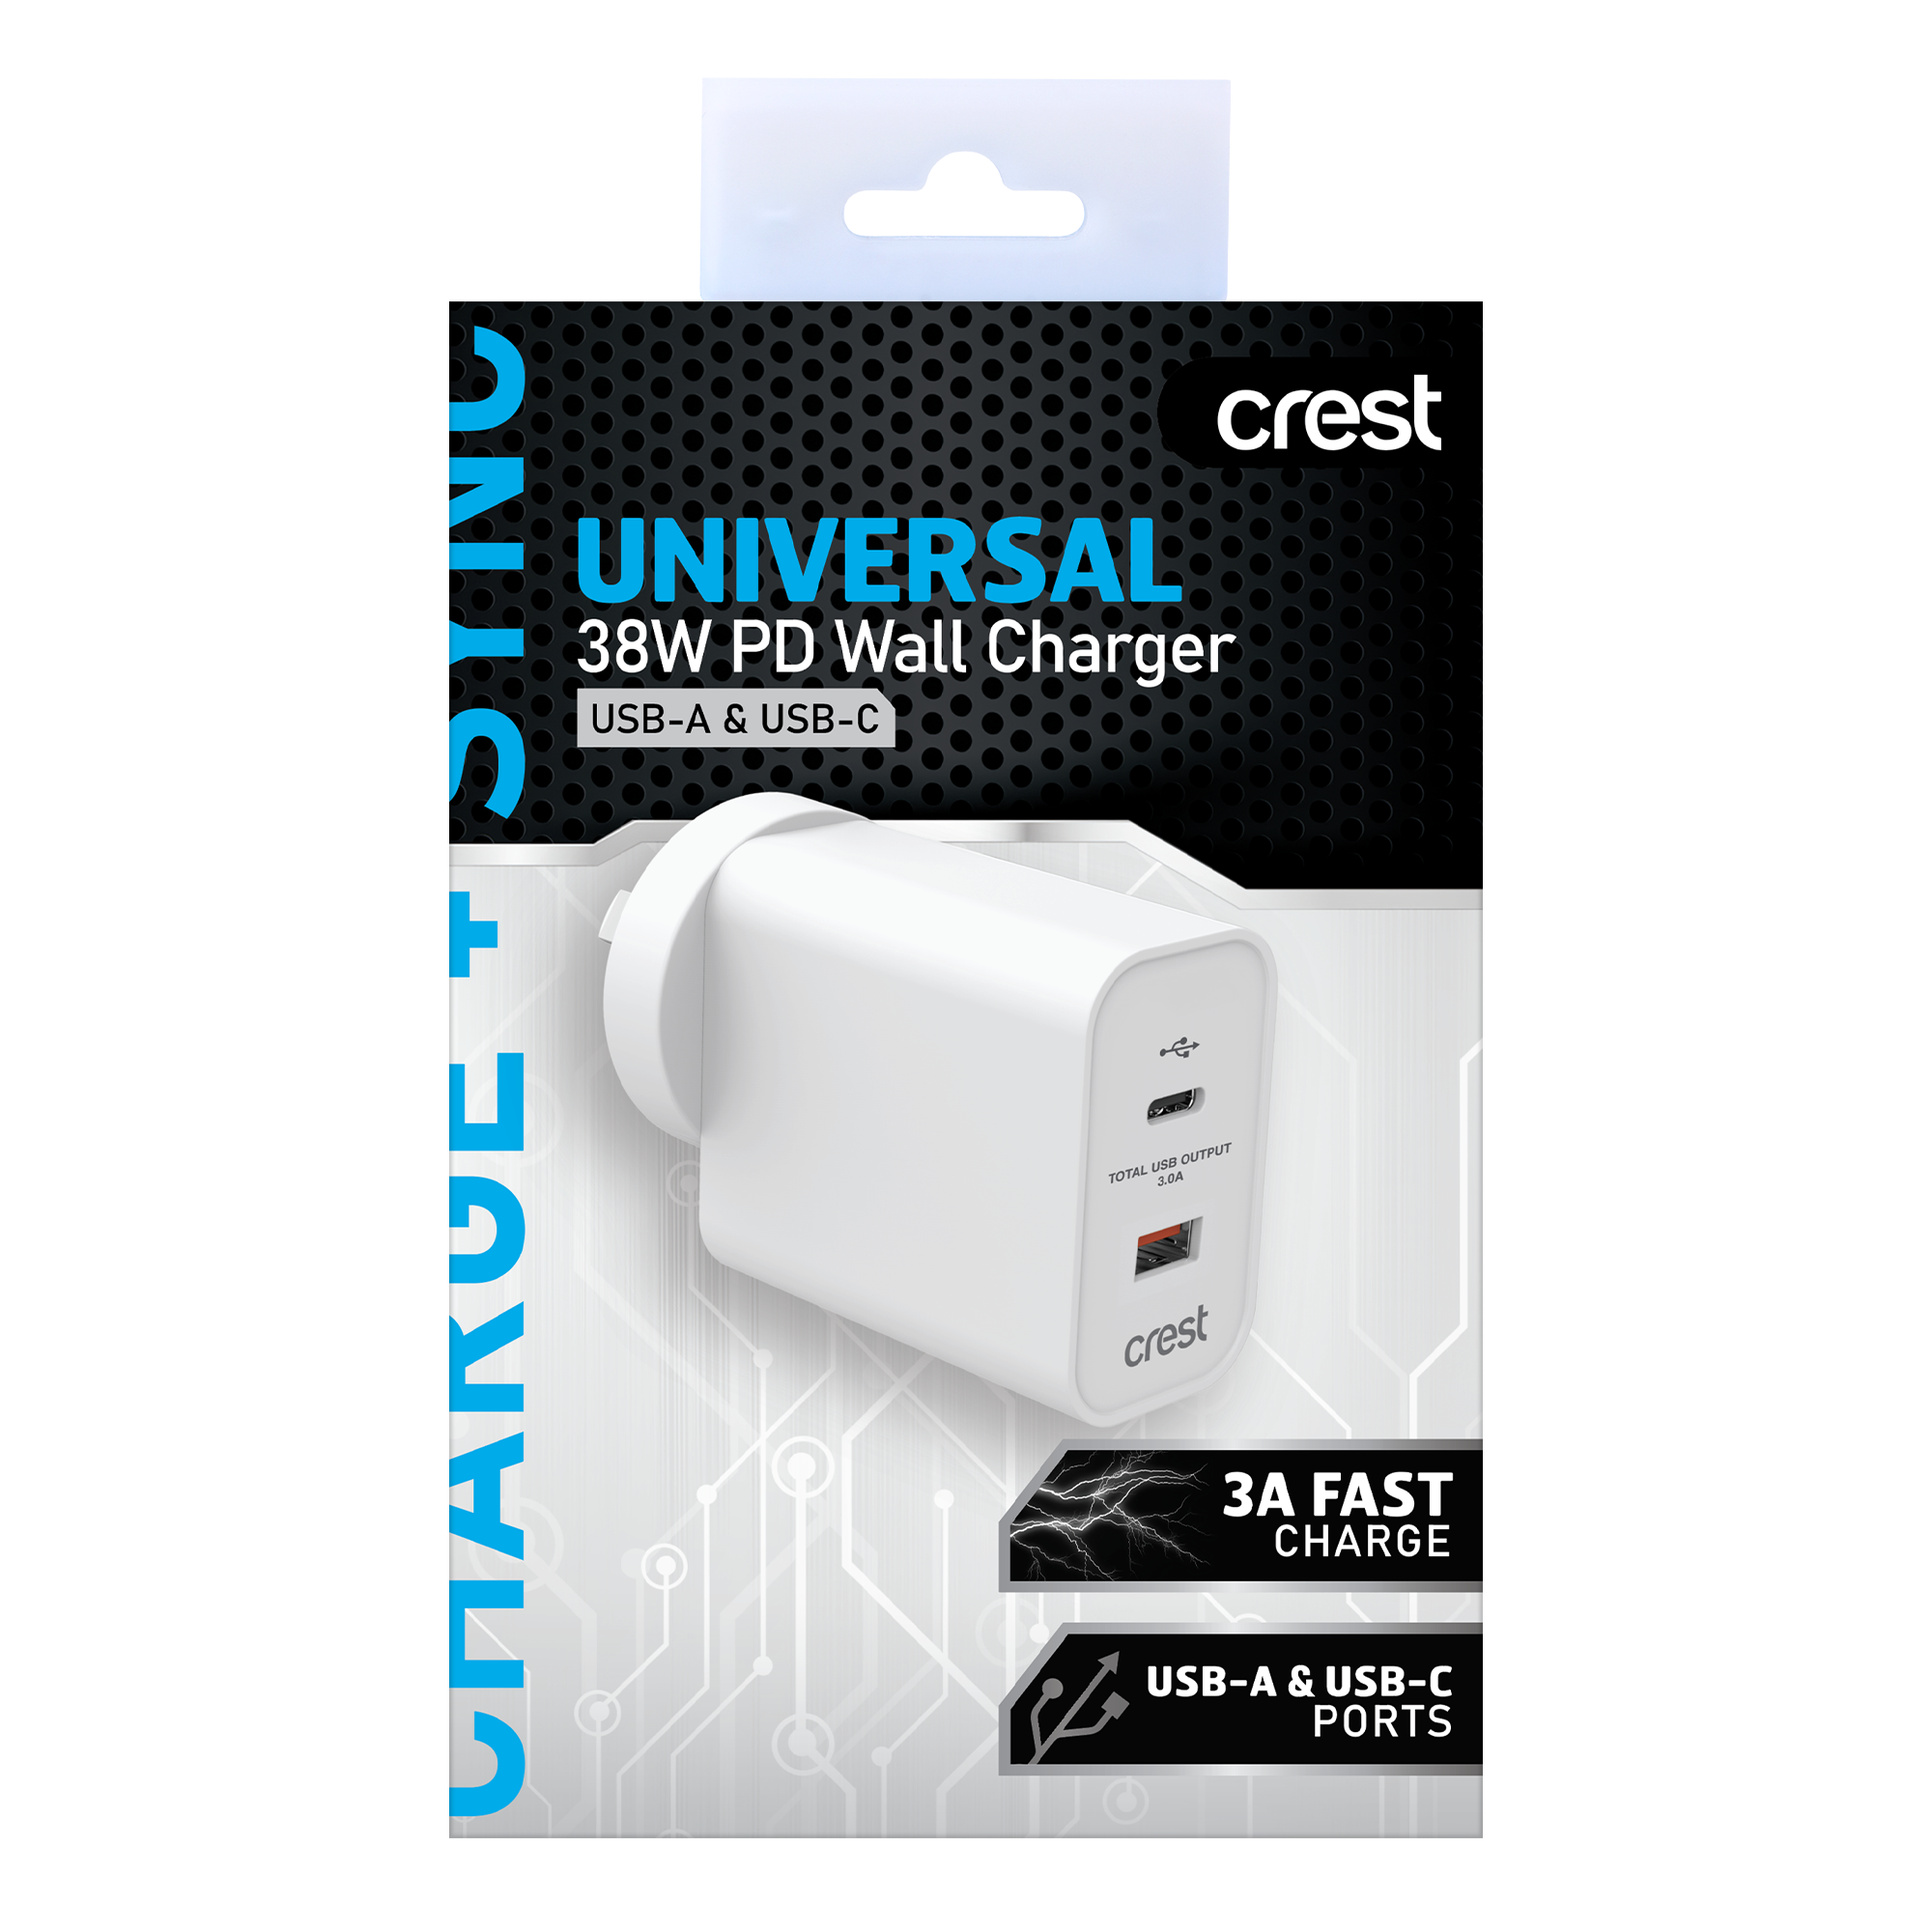 USB-A & USB-C 38W PD Wall Charger